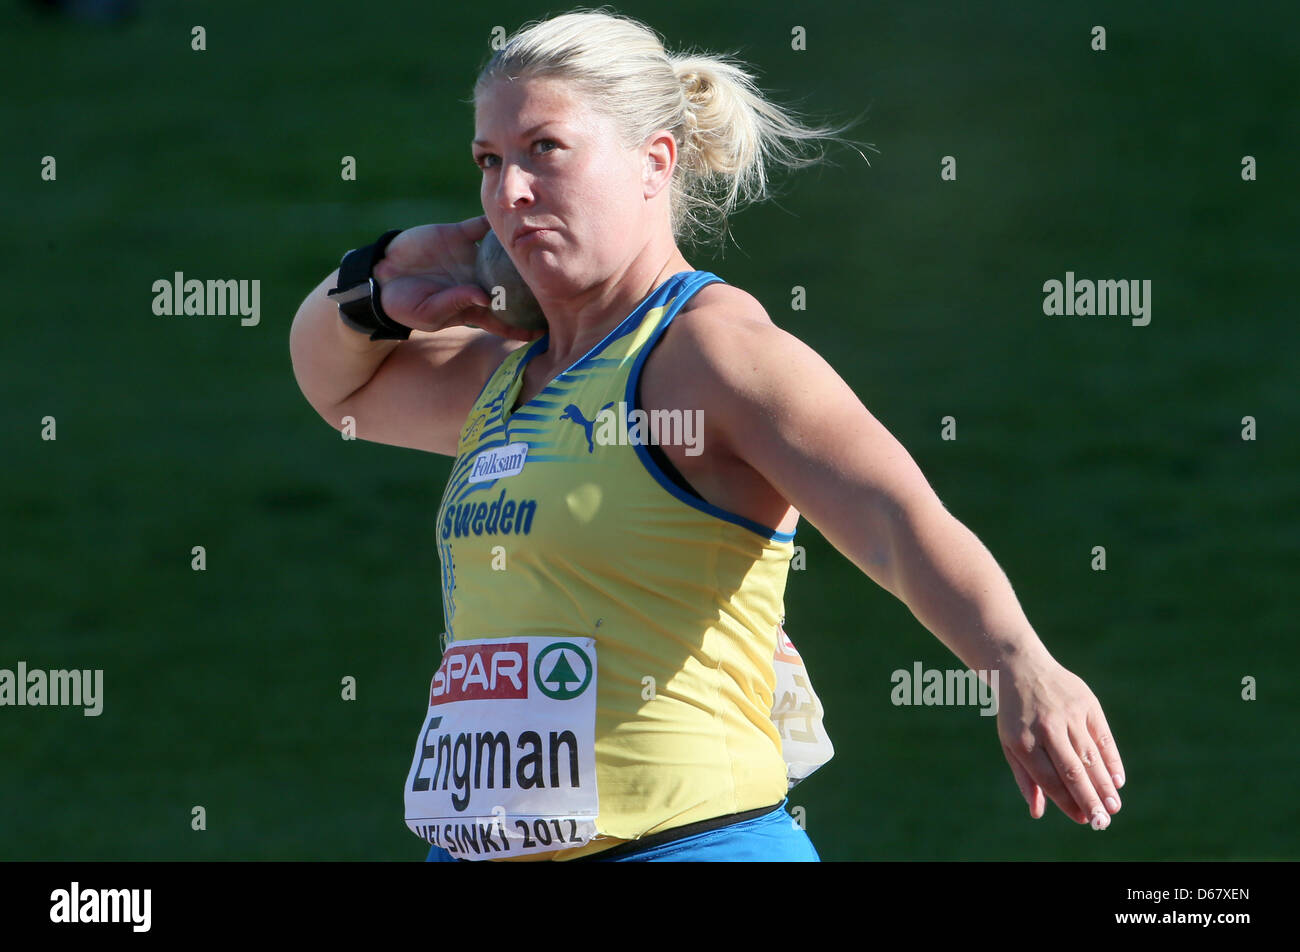 helena-engman-of-sweden-competes-during-the-shot-put-final-at-the-D67XEN.jpg